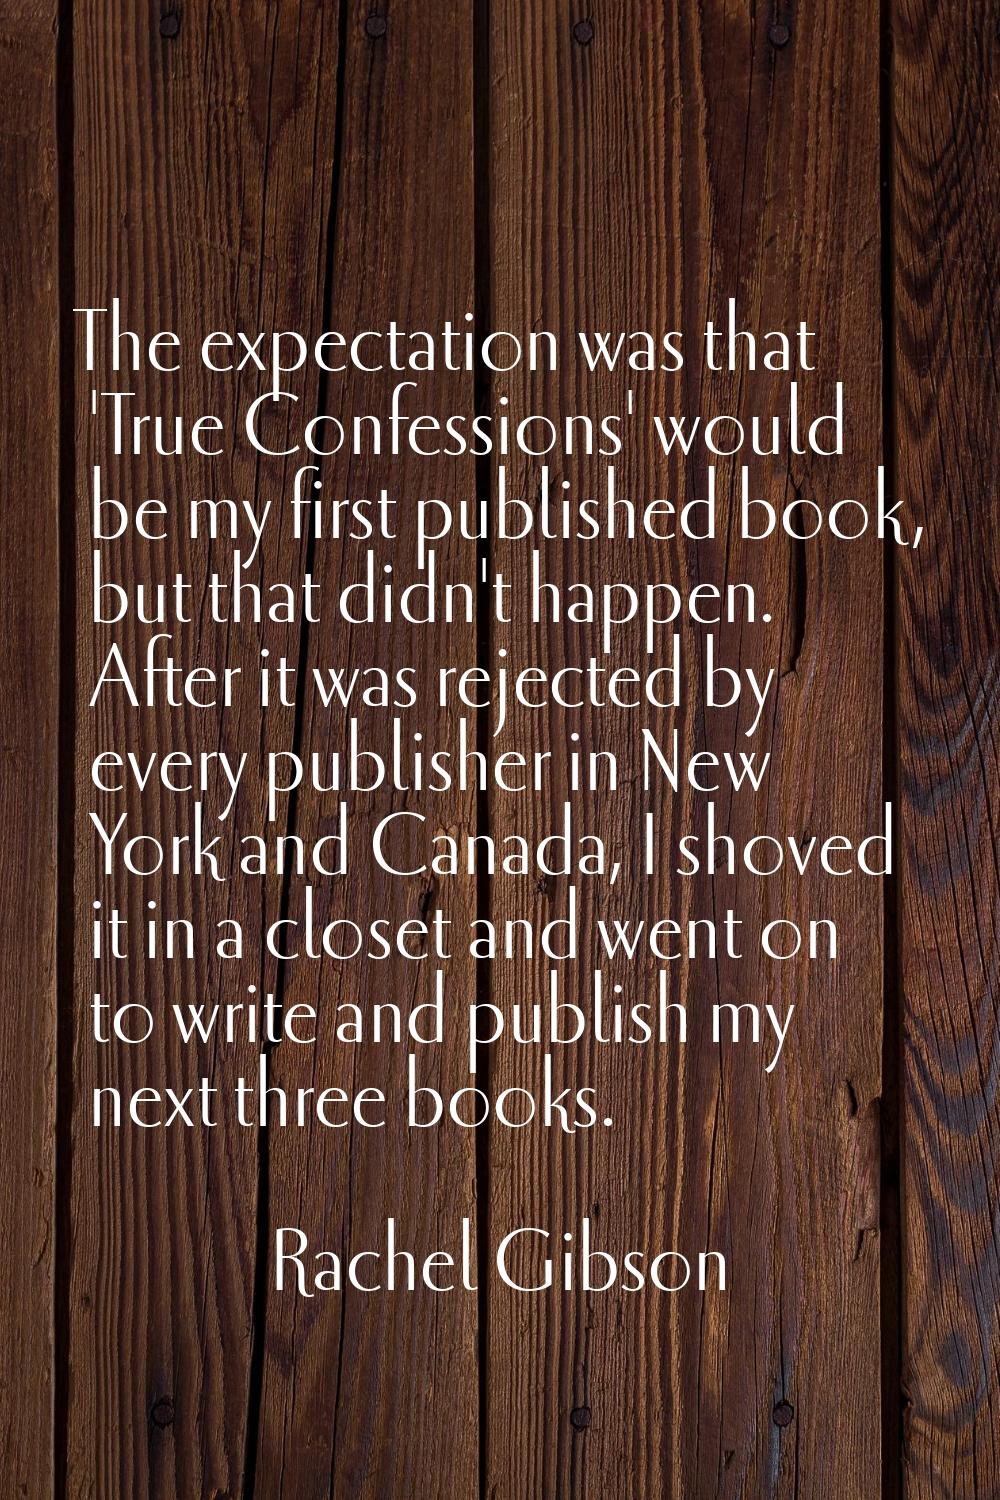 The expectation was that 'True Confessions' would be my first published book, but that didn't happe